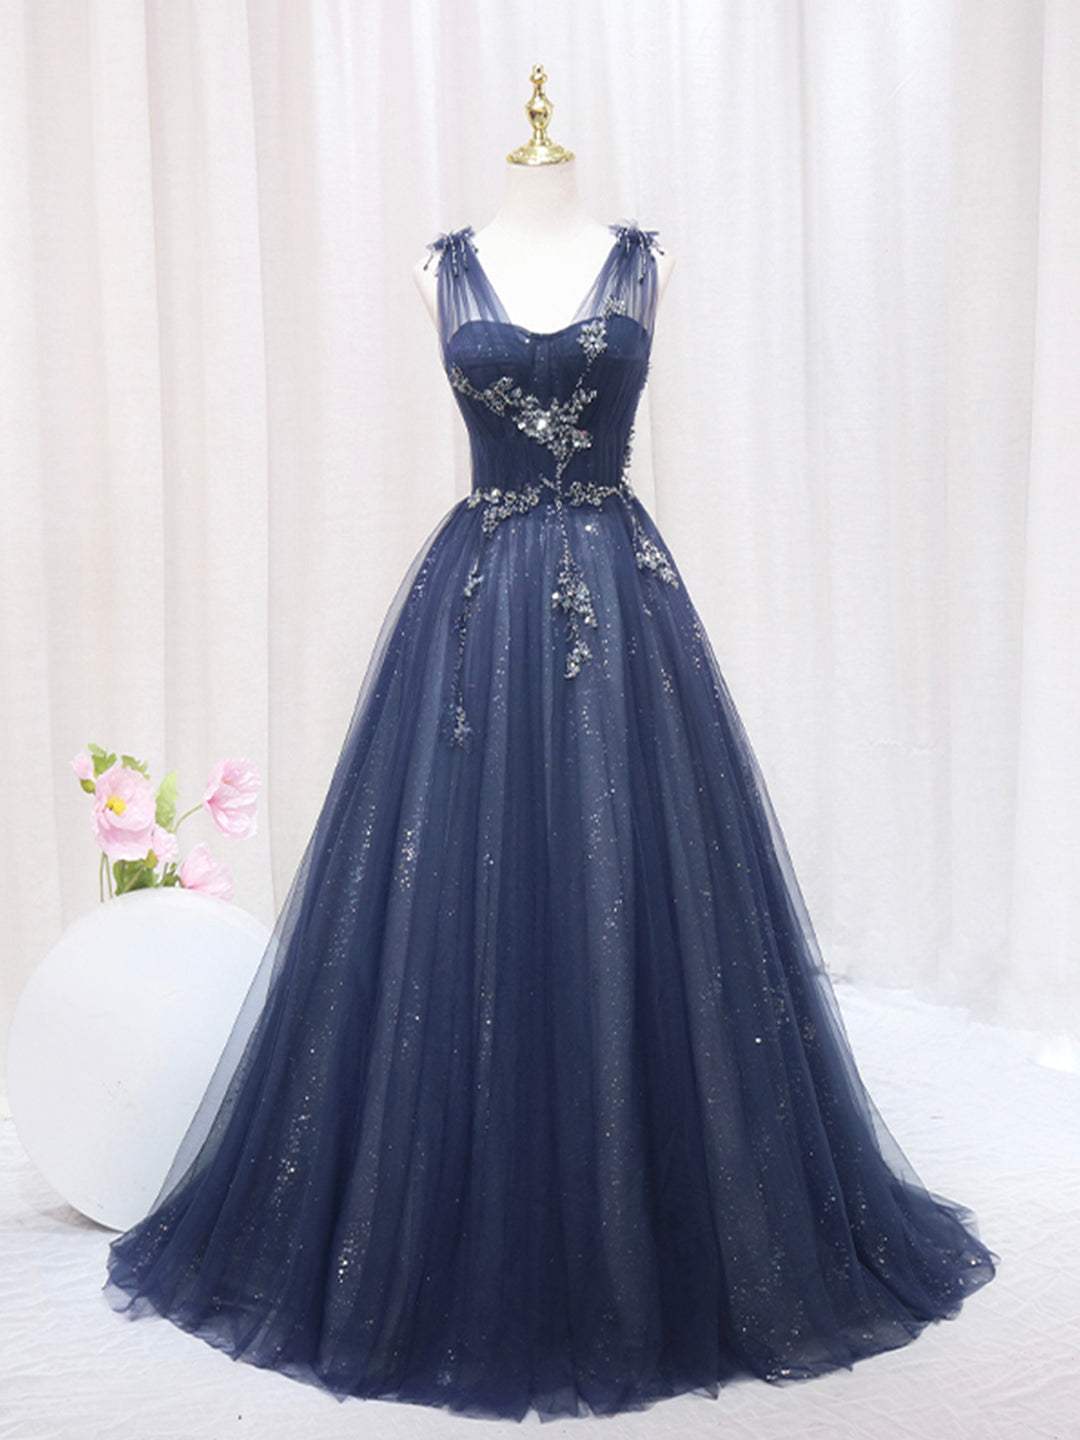 Blue Tulle Beaded Long Prom Dress, Blue Evening Party Dress